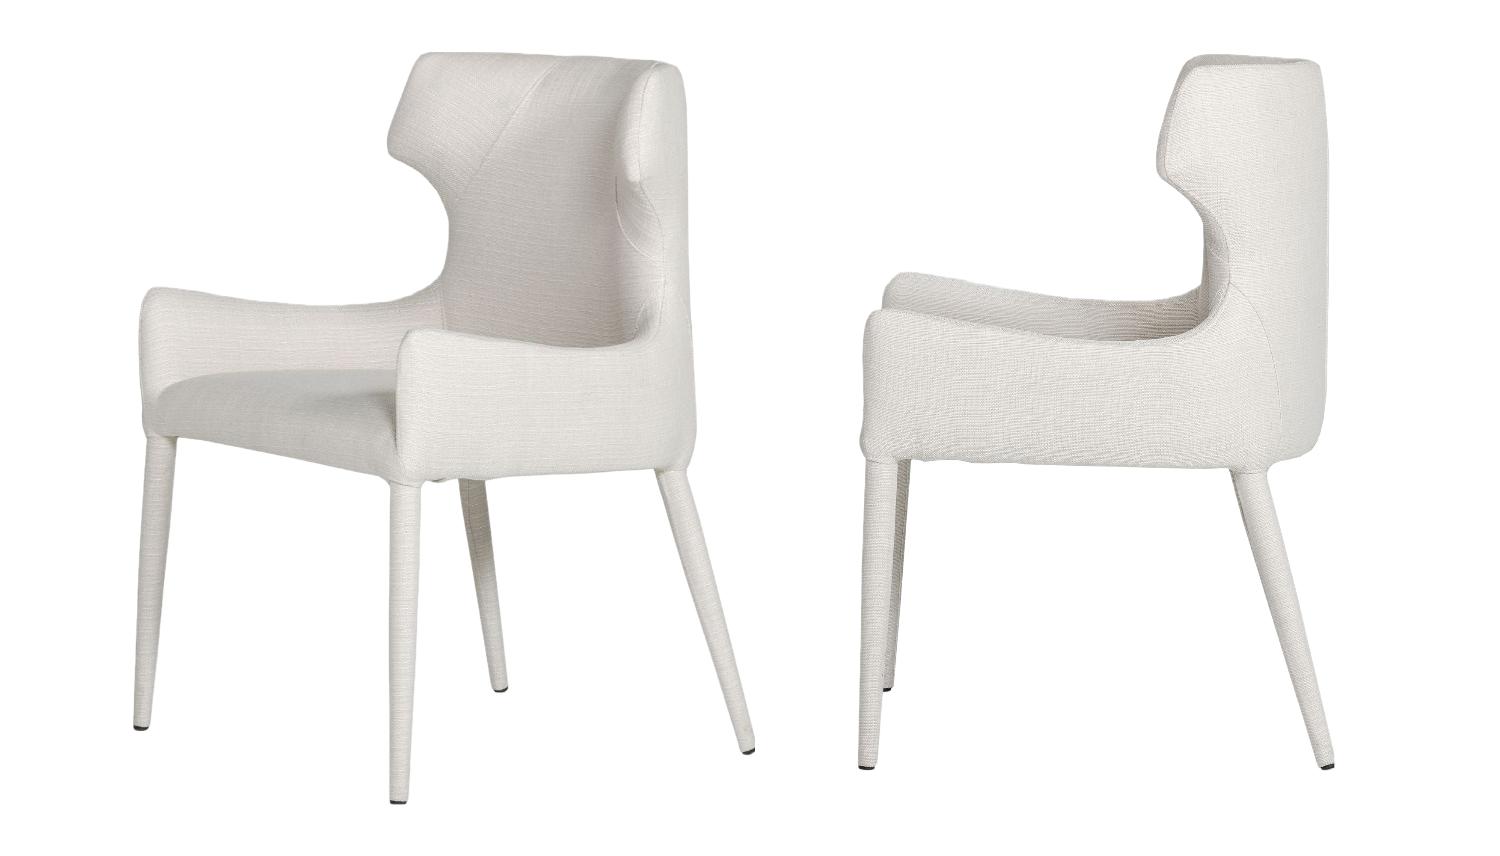 Contemporary, Modern Dining Chair Set Gallo VGEUMC-9695CH-BEI-2pcs in Beige Fabric